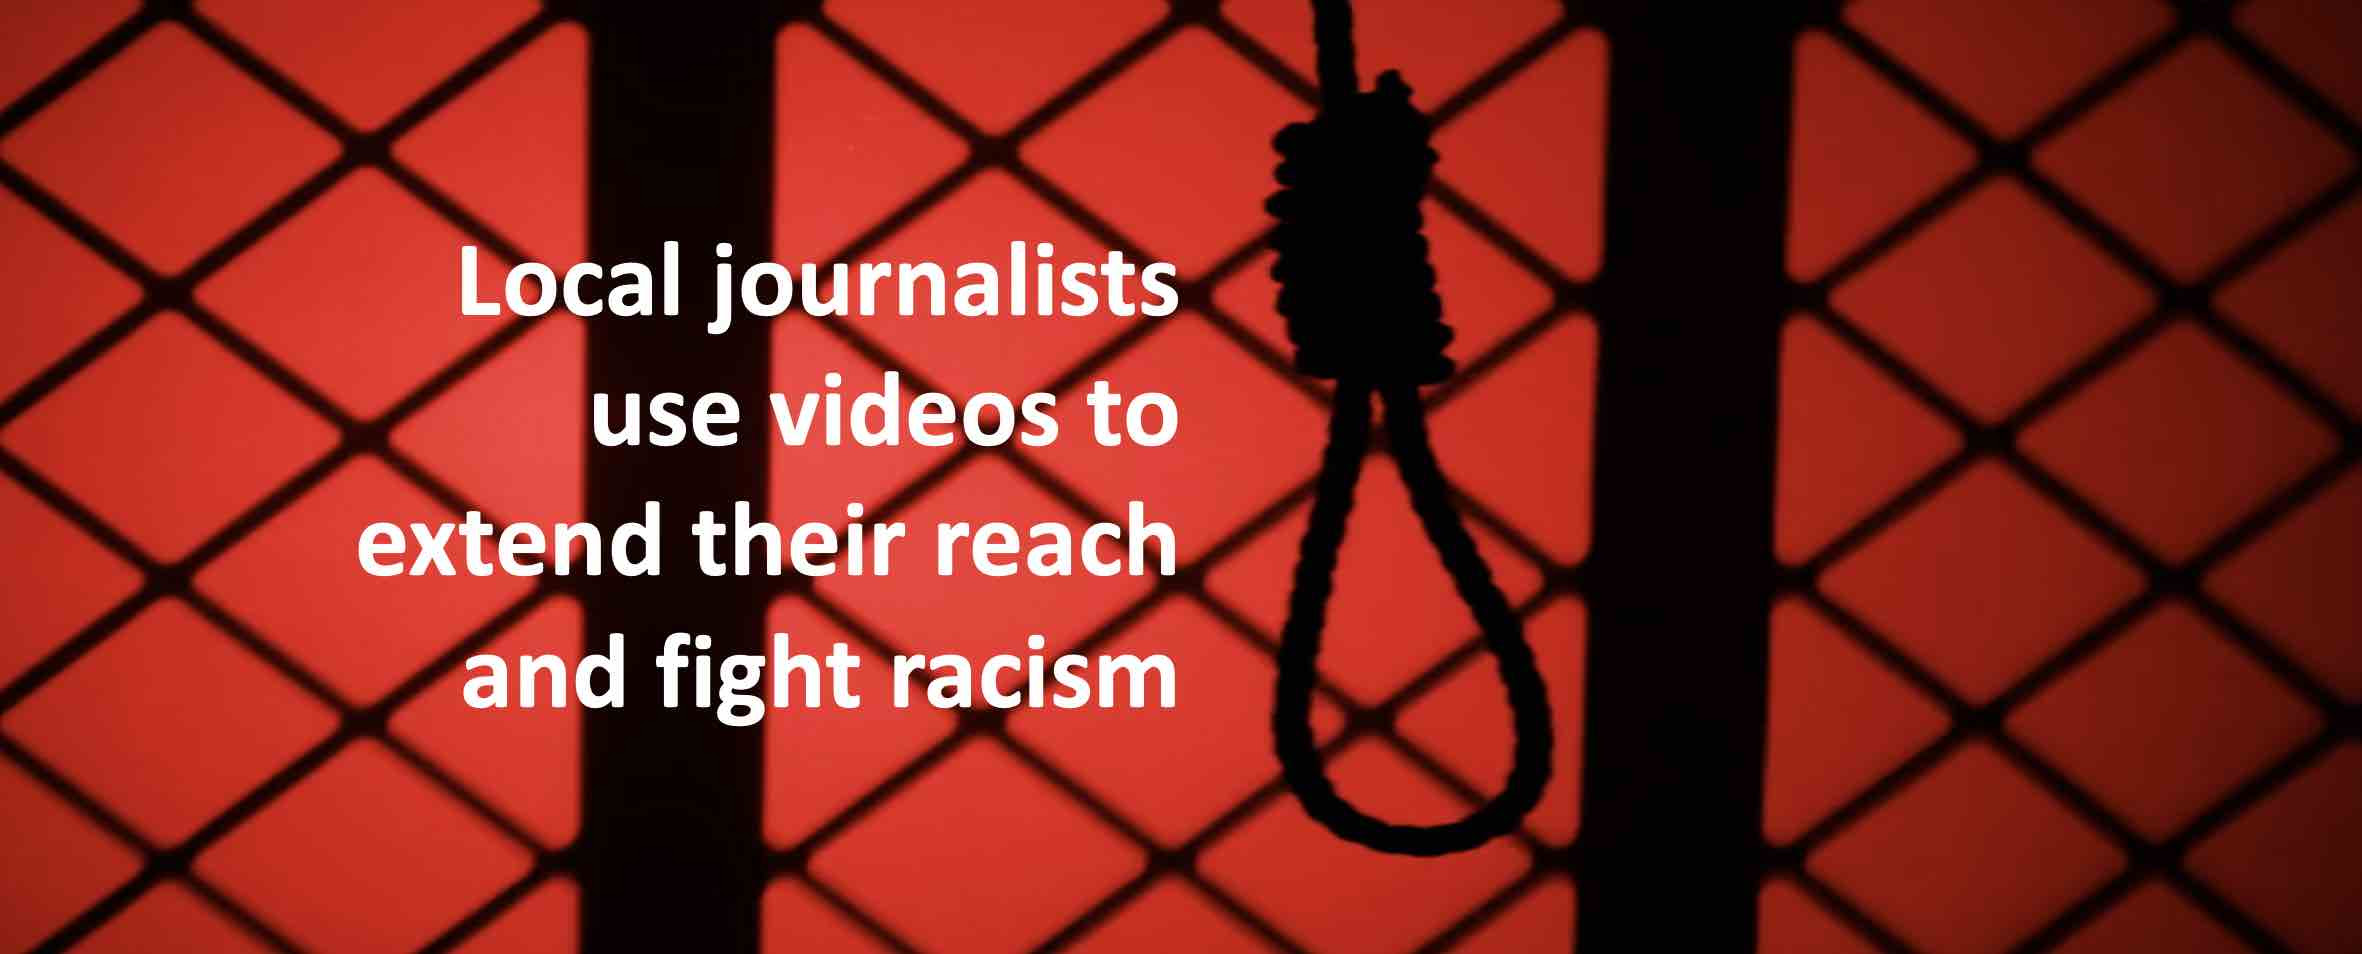 Local journalists use videos to extend their reach and fight racism